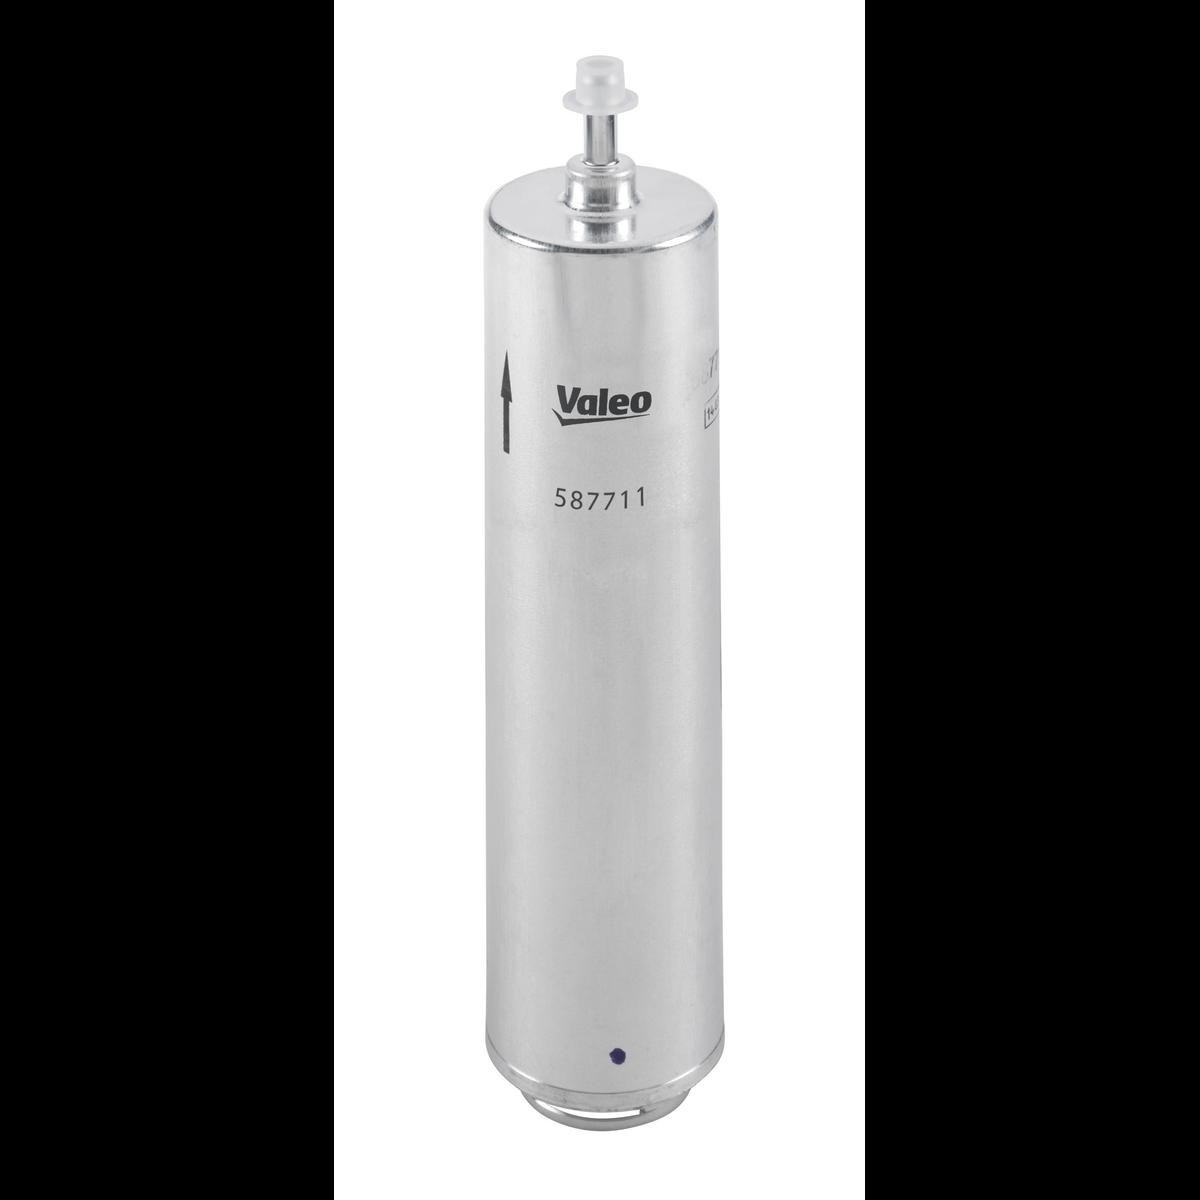 VALEO Fuel filter diesel and petrol E87 new 587711